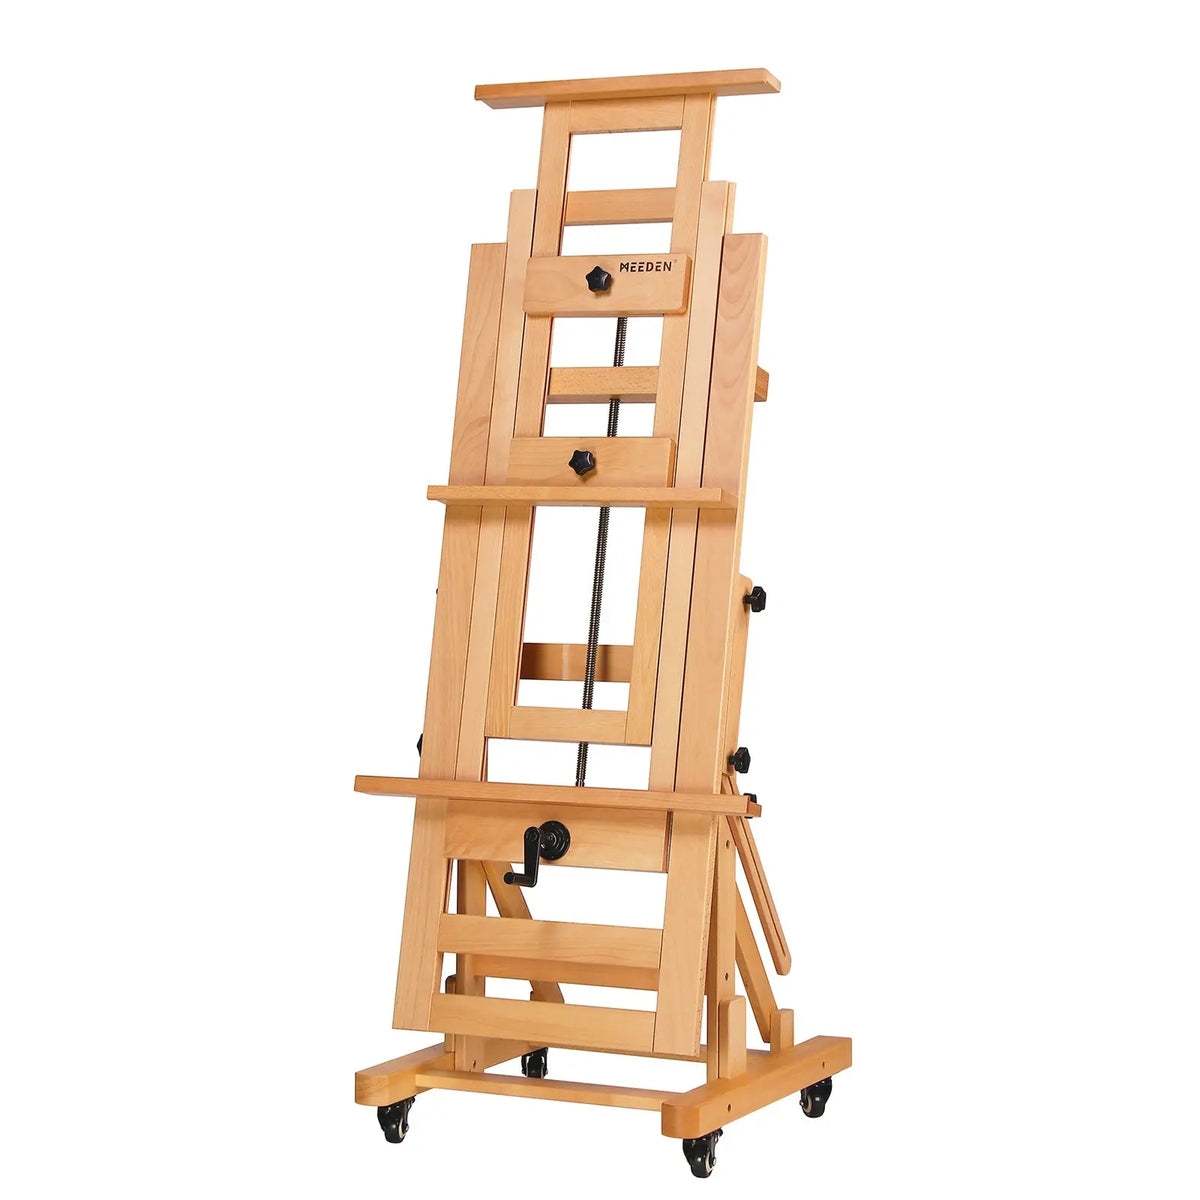 Professional Artist Wooden Material Display Artist Easel Painting